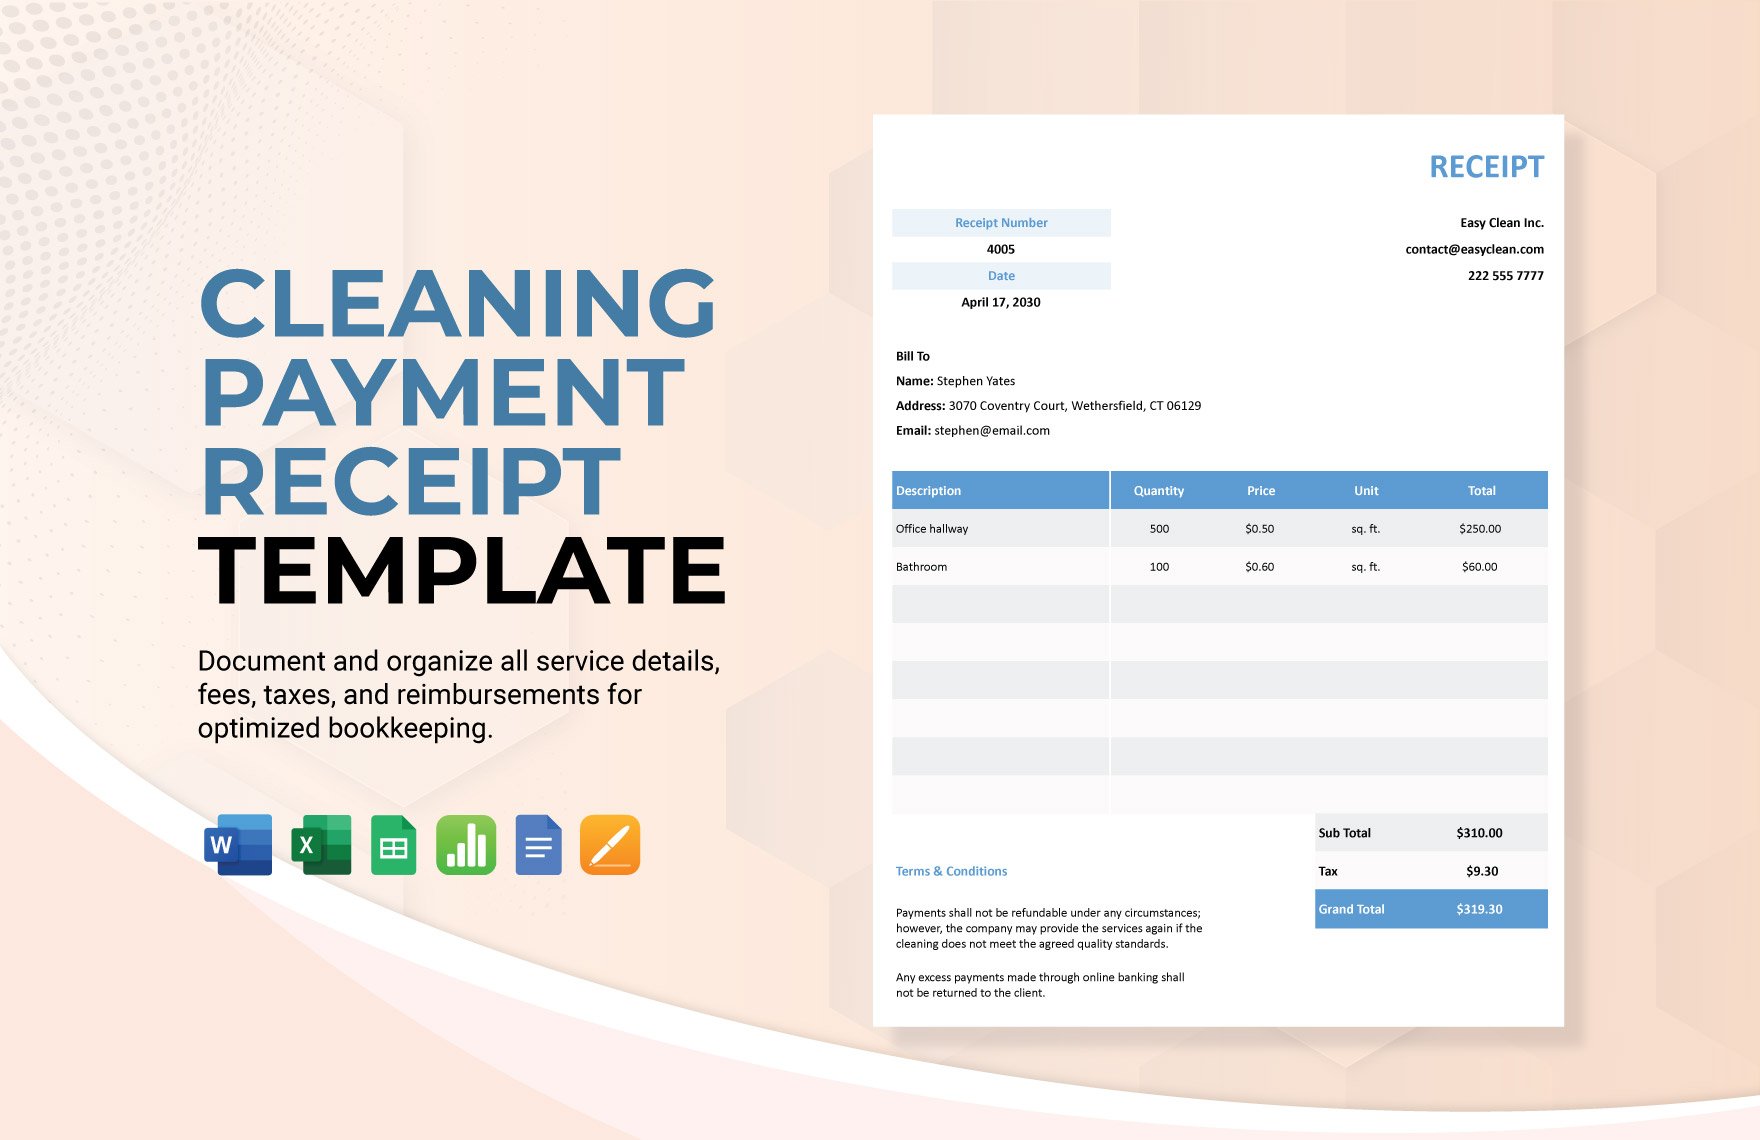 Cleaning Payment Receipt Template in Word, Google Docs, Excel, Google Sheets, Apple Pages, Apple Numbers